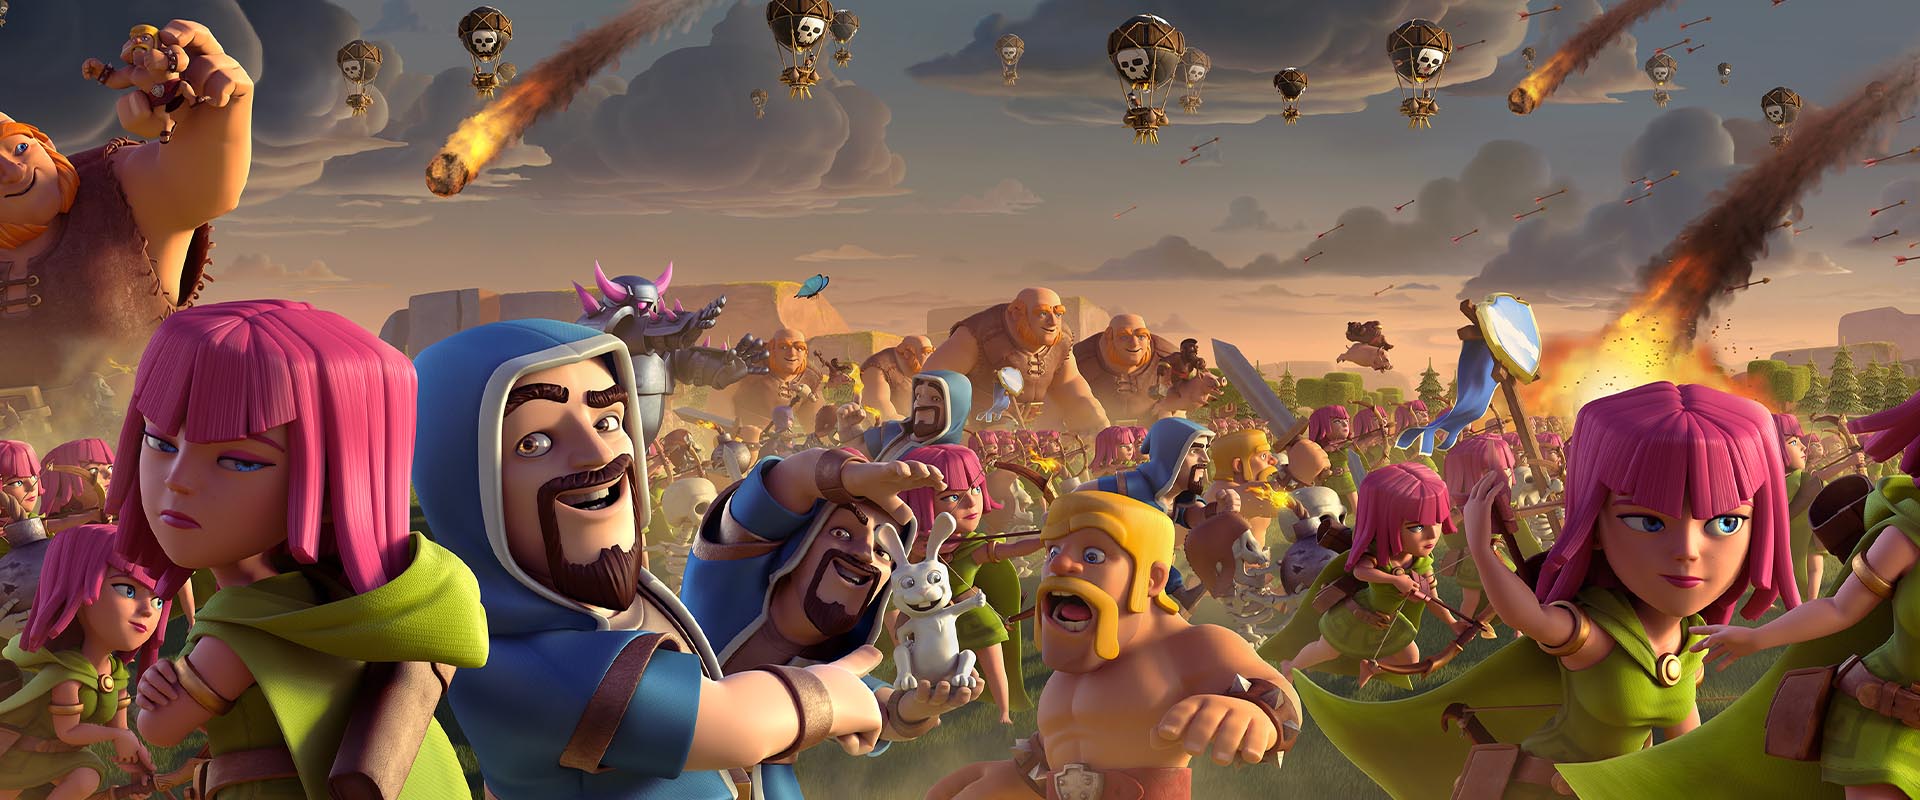 Clash of Clans Town Hall 16 Dev Update!